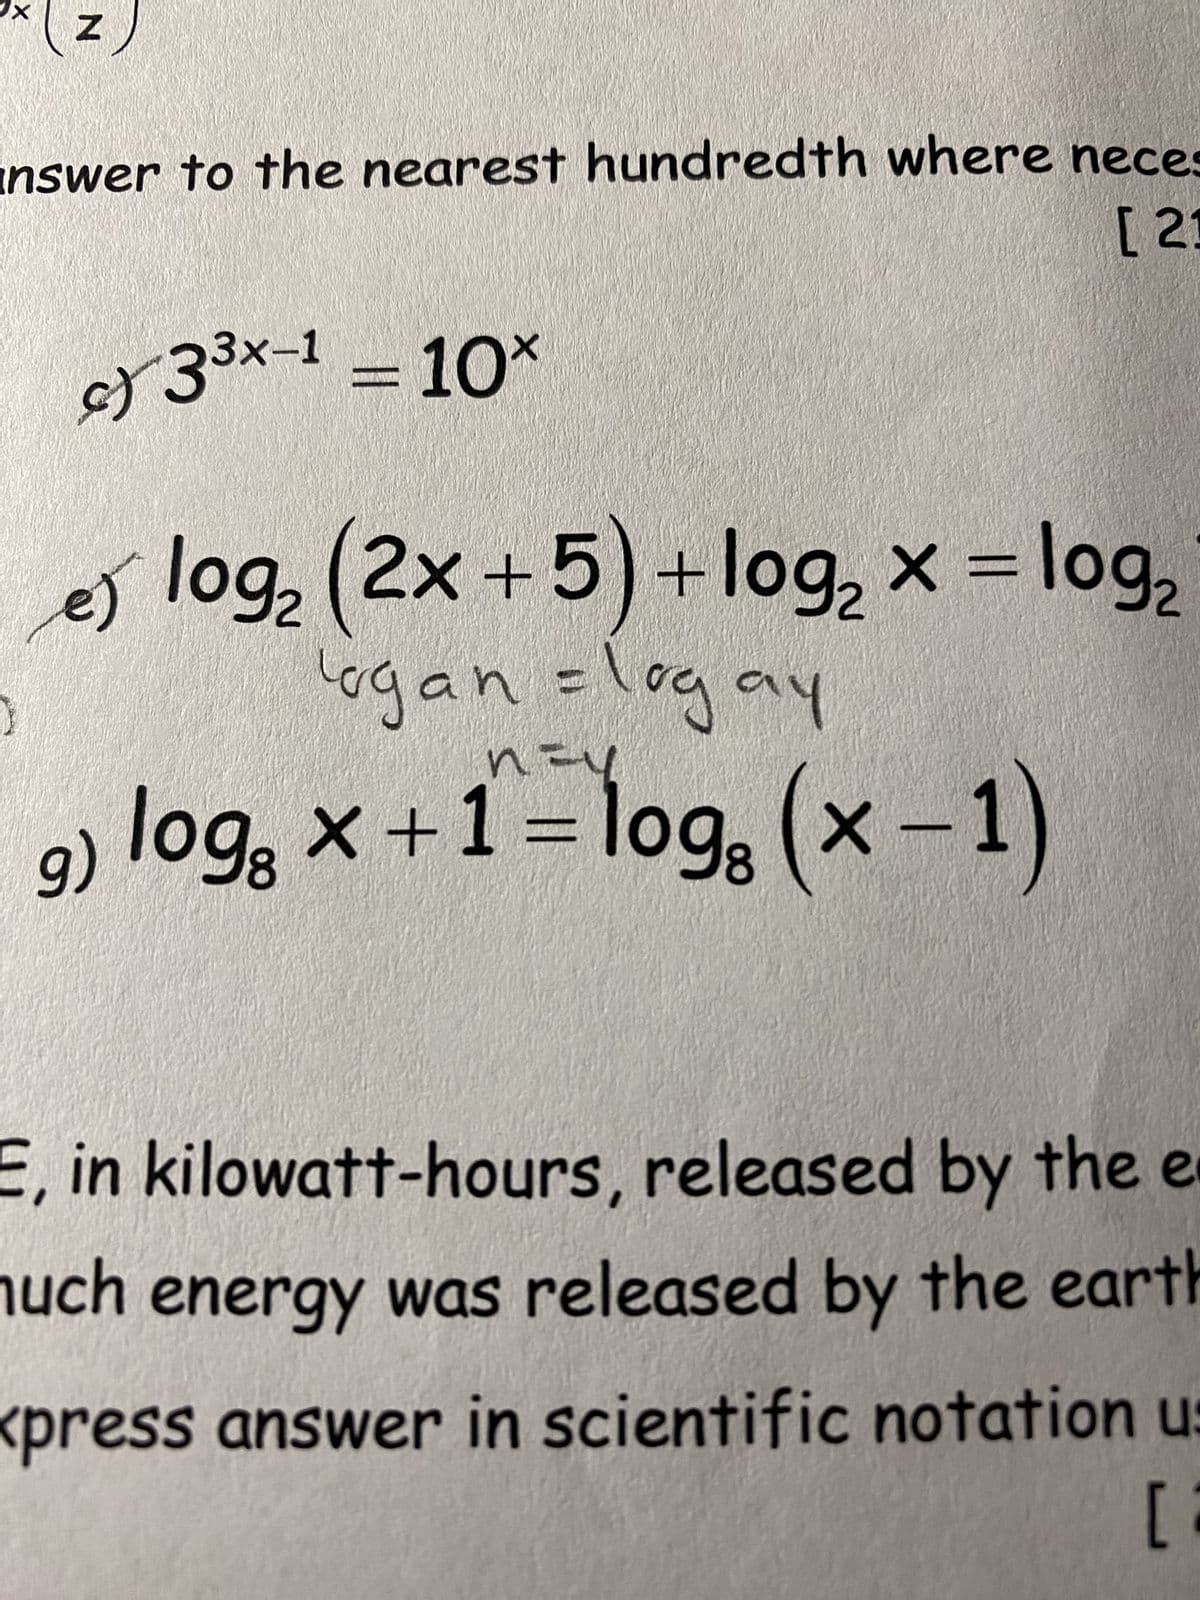 X
N
answer to the nearest hundredth where neces
[21
c) 3³x-1 = 10×
x
e) x
log₂ (2x+5) +log₂ × = log₂
Logan=logay
g) log x+ 1 = logg (x-1)
E, in kilowatt-hours, released by the e
much energy was released by the earth
<press answer in scientific notation us
[2